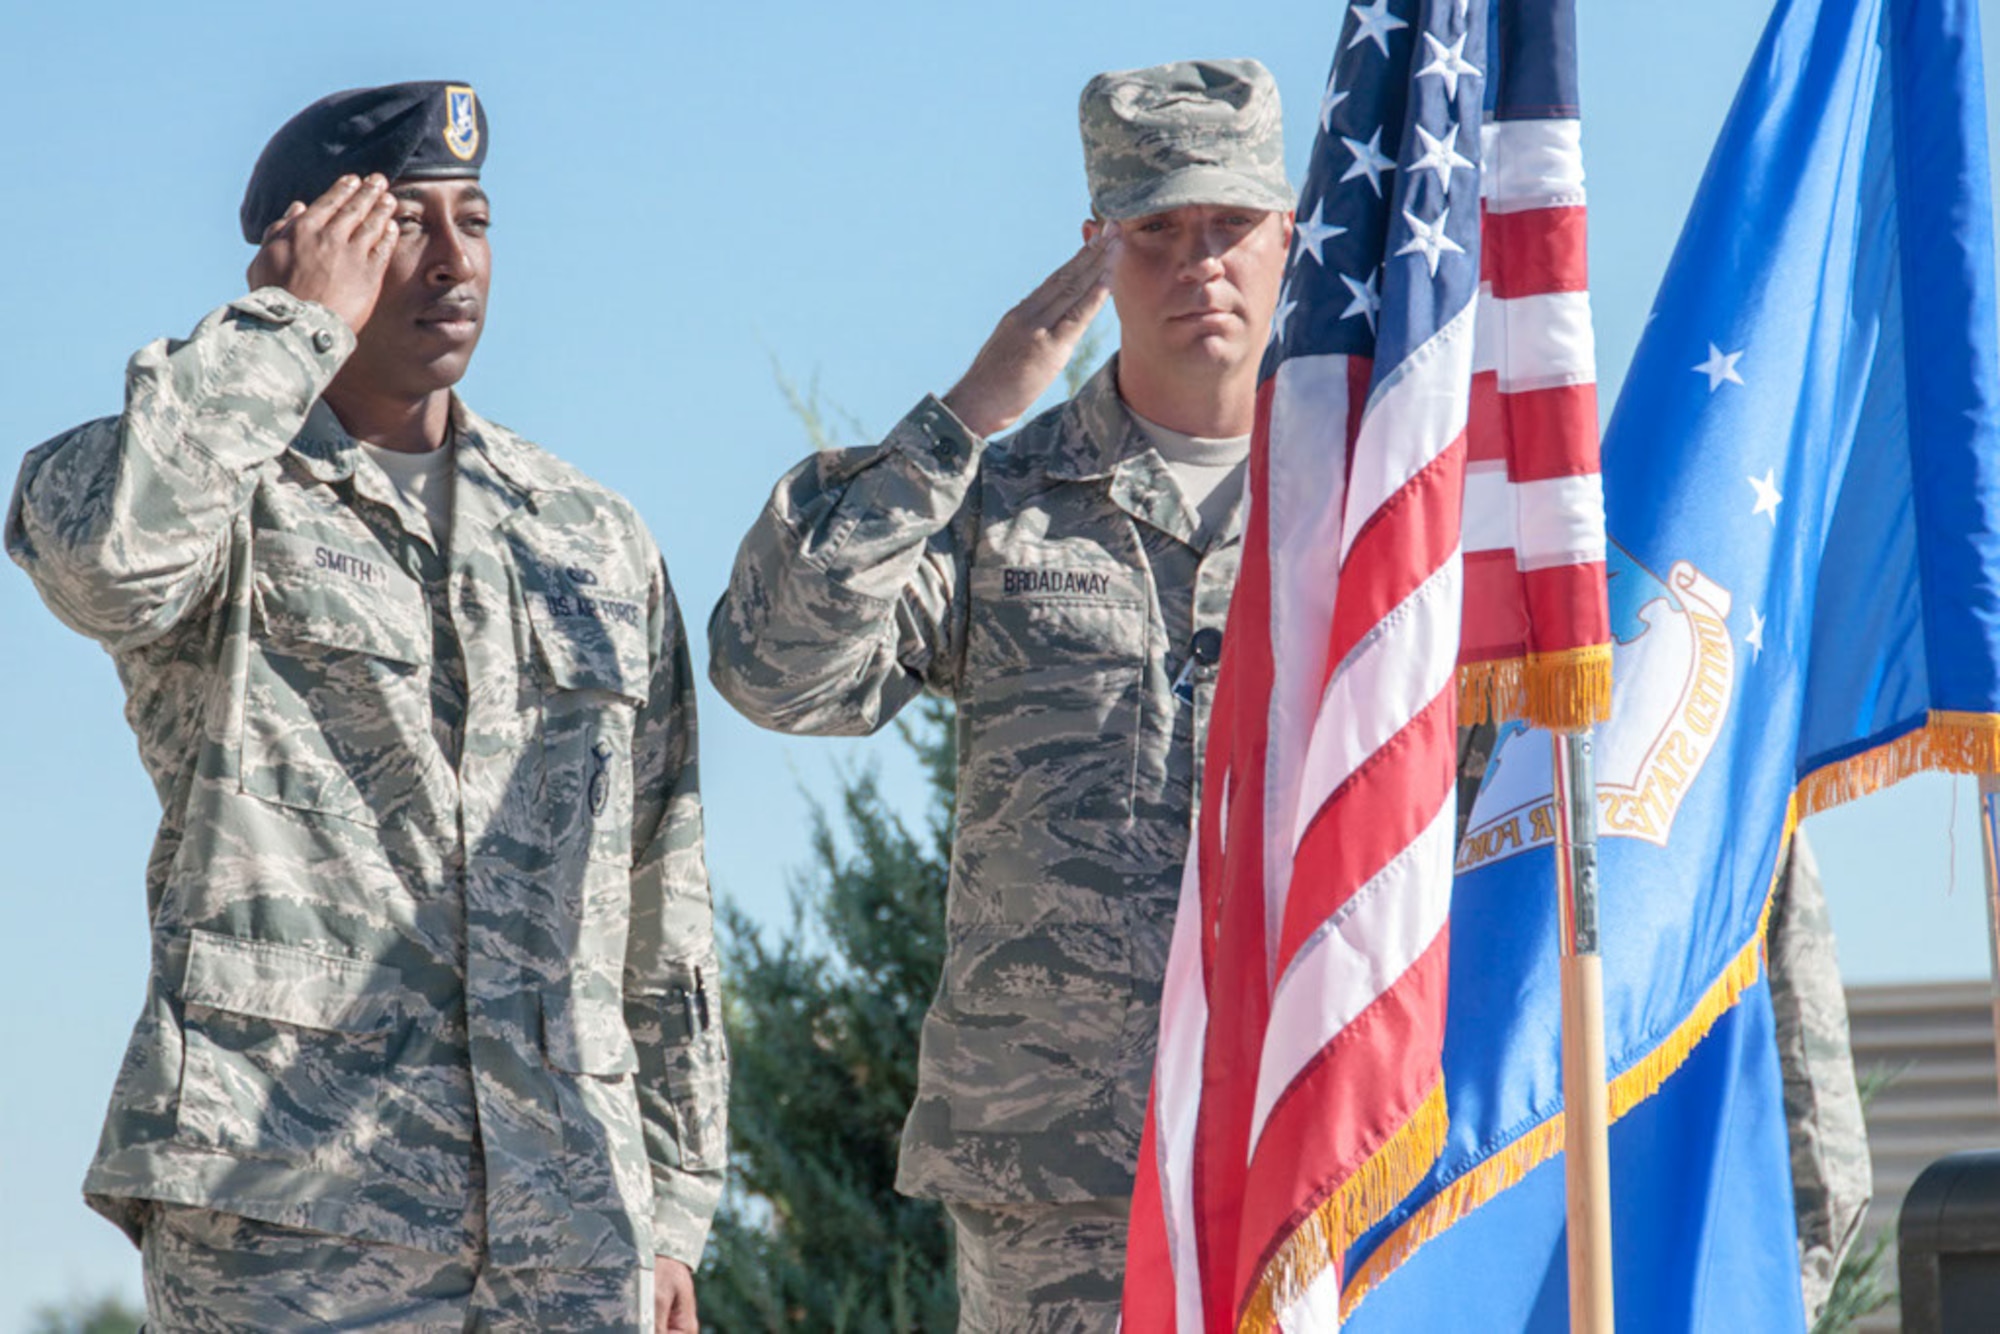 Master Sgt. Broadaway and Tech. Sgt. Smith salute the flag during the opening ceremony to celebrate the moving of the MSG to the 310th SW Headquarters on 7 Aug. 2016.